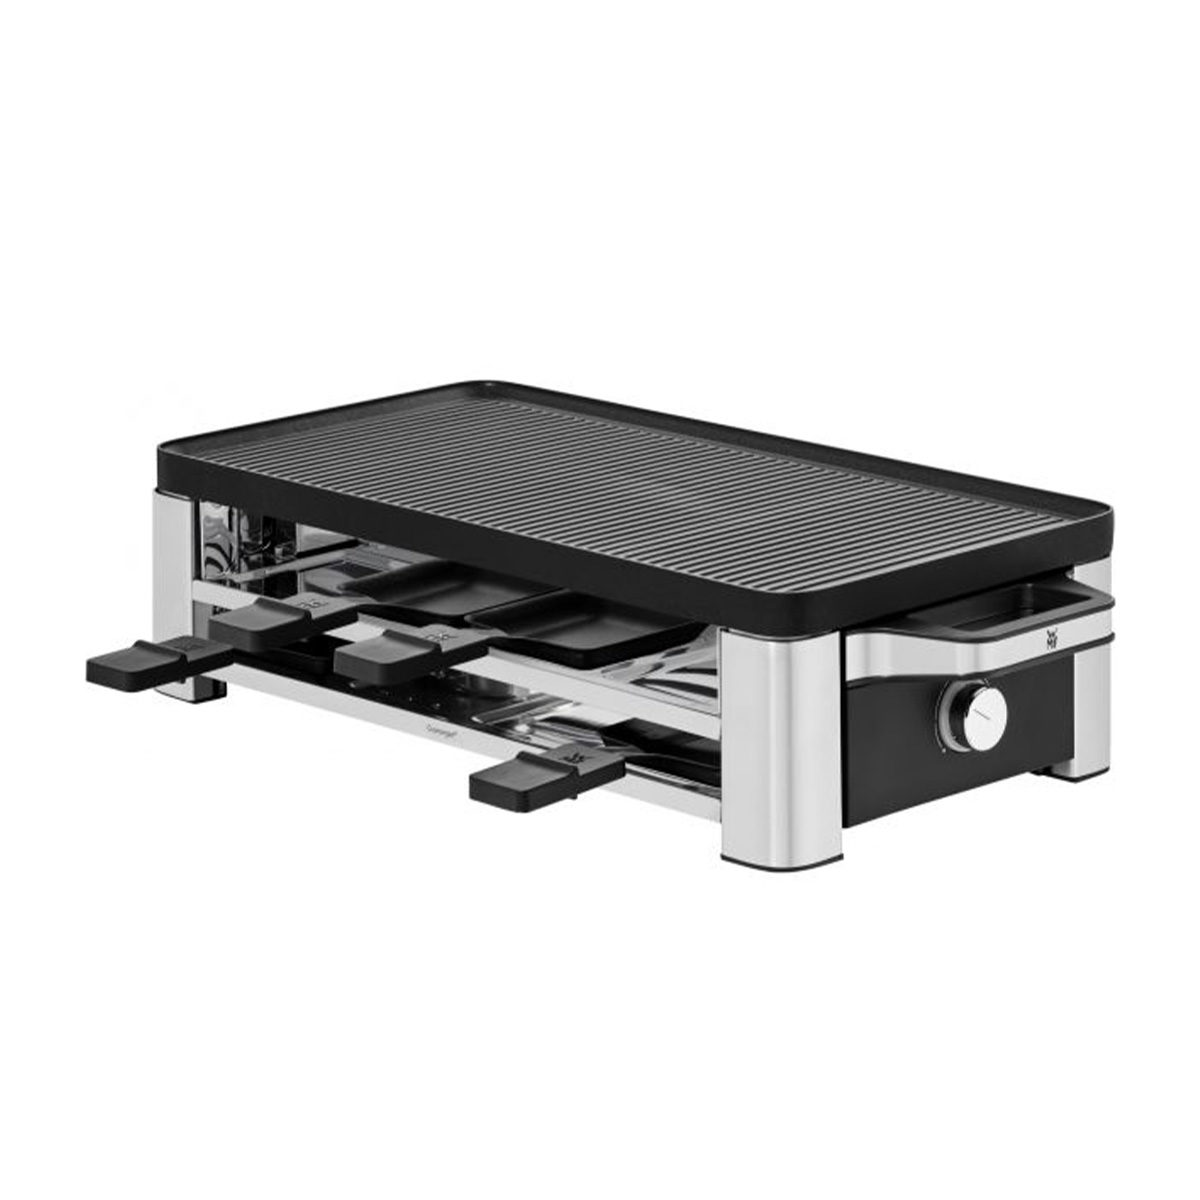 WMF Raclette Grill Angebot